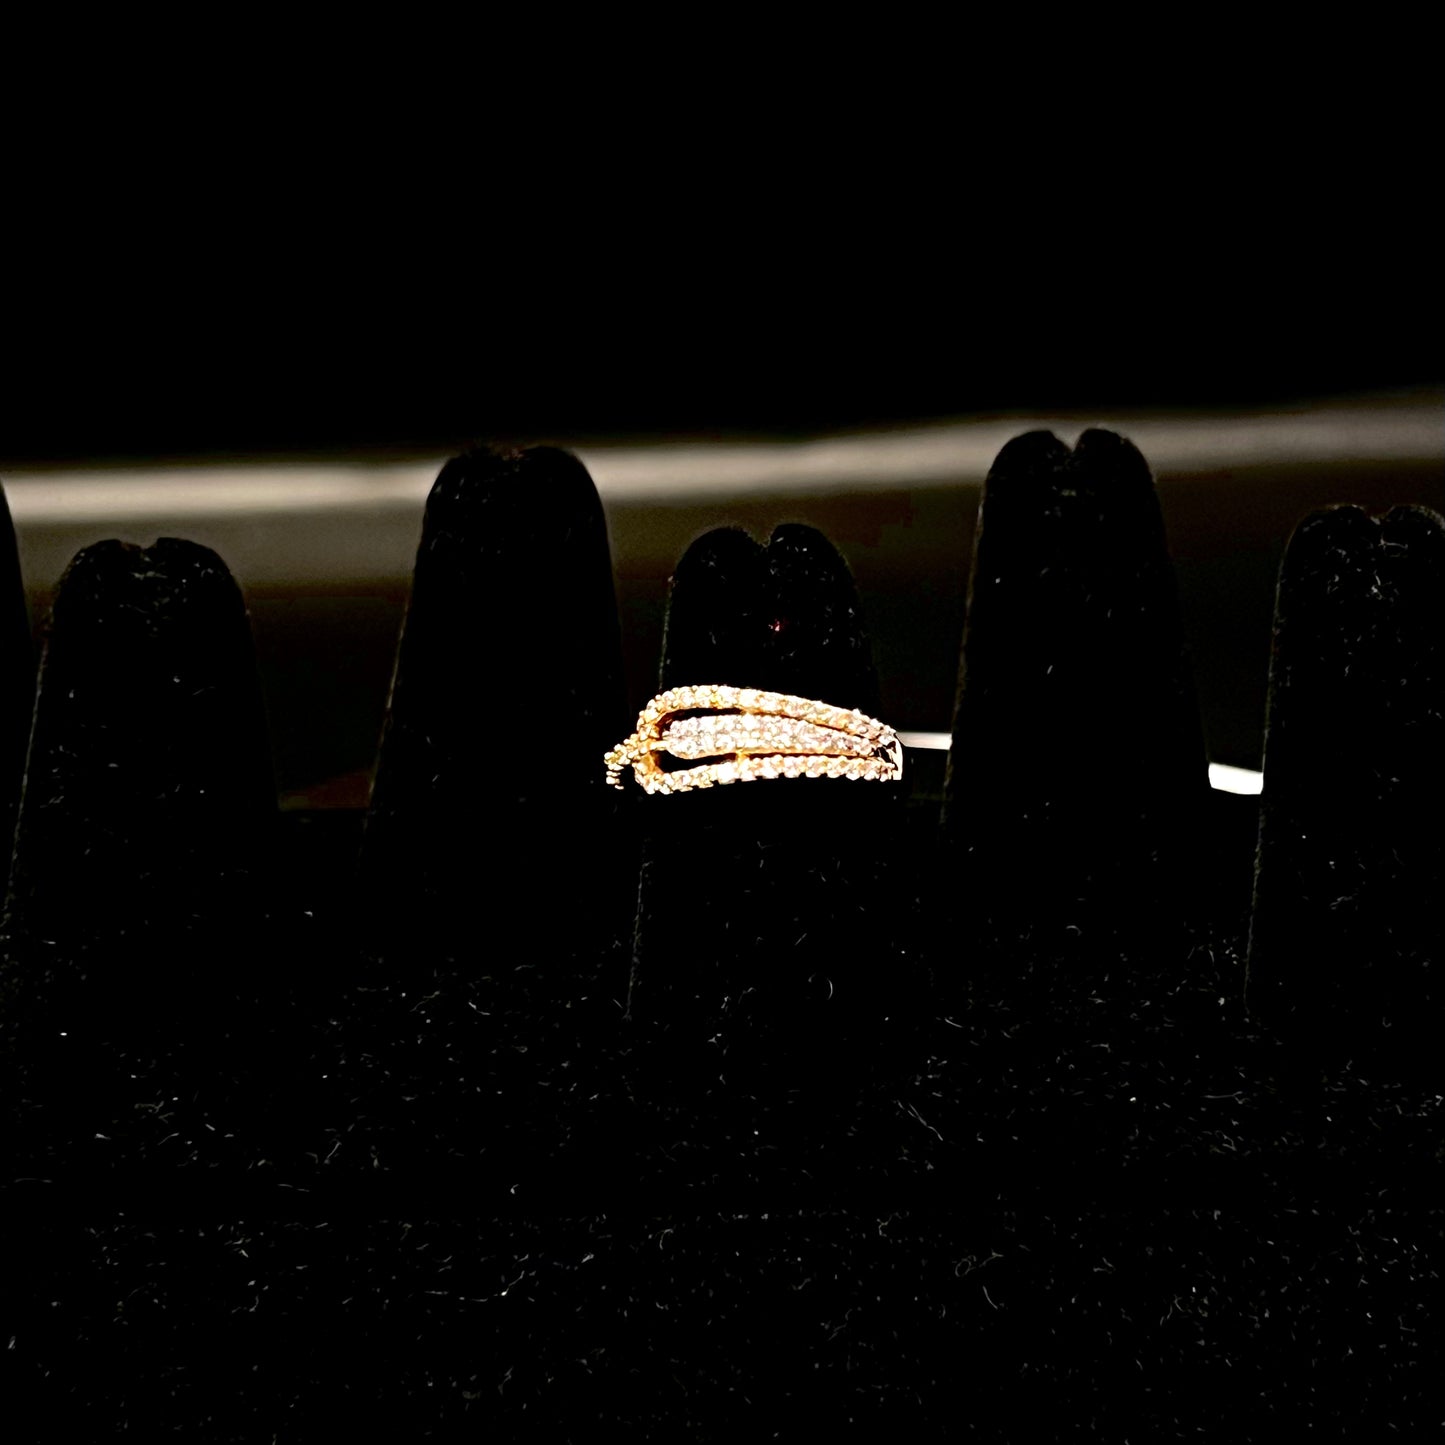 Slender Gold Band with CZ Stones